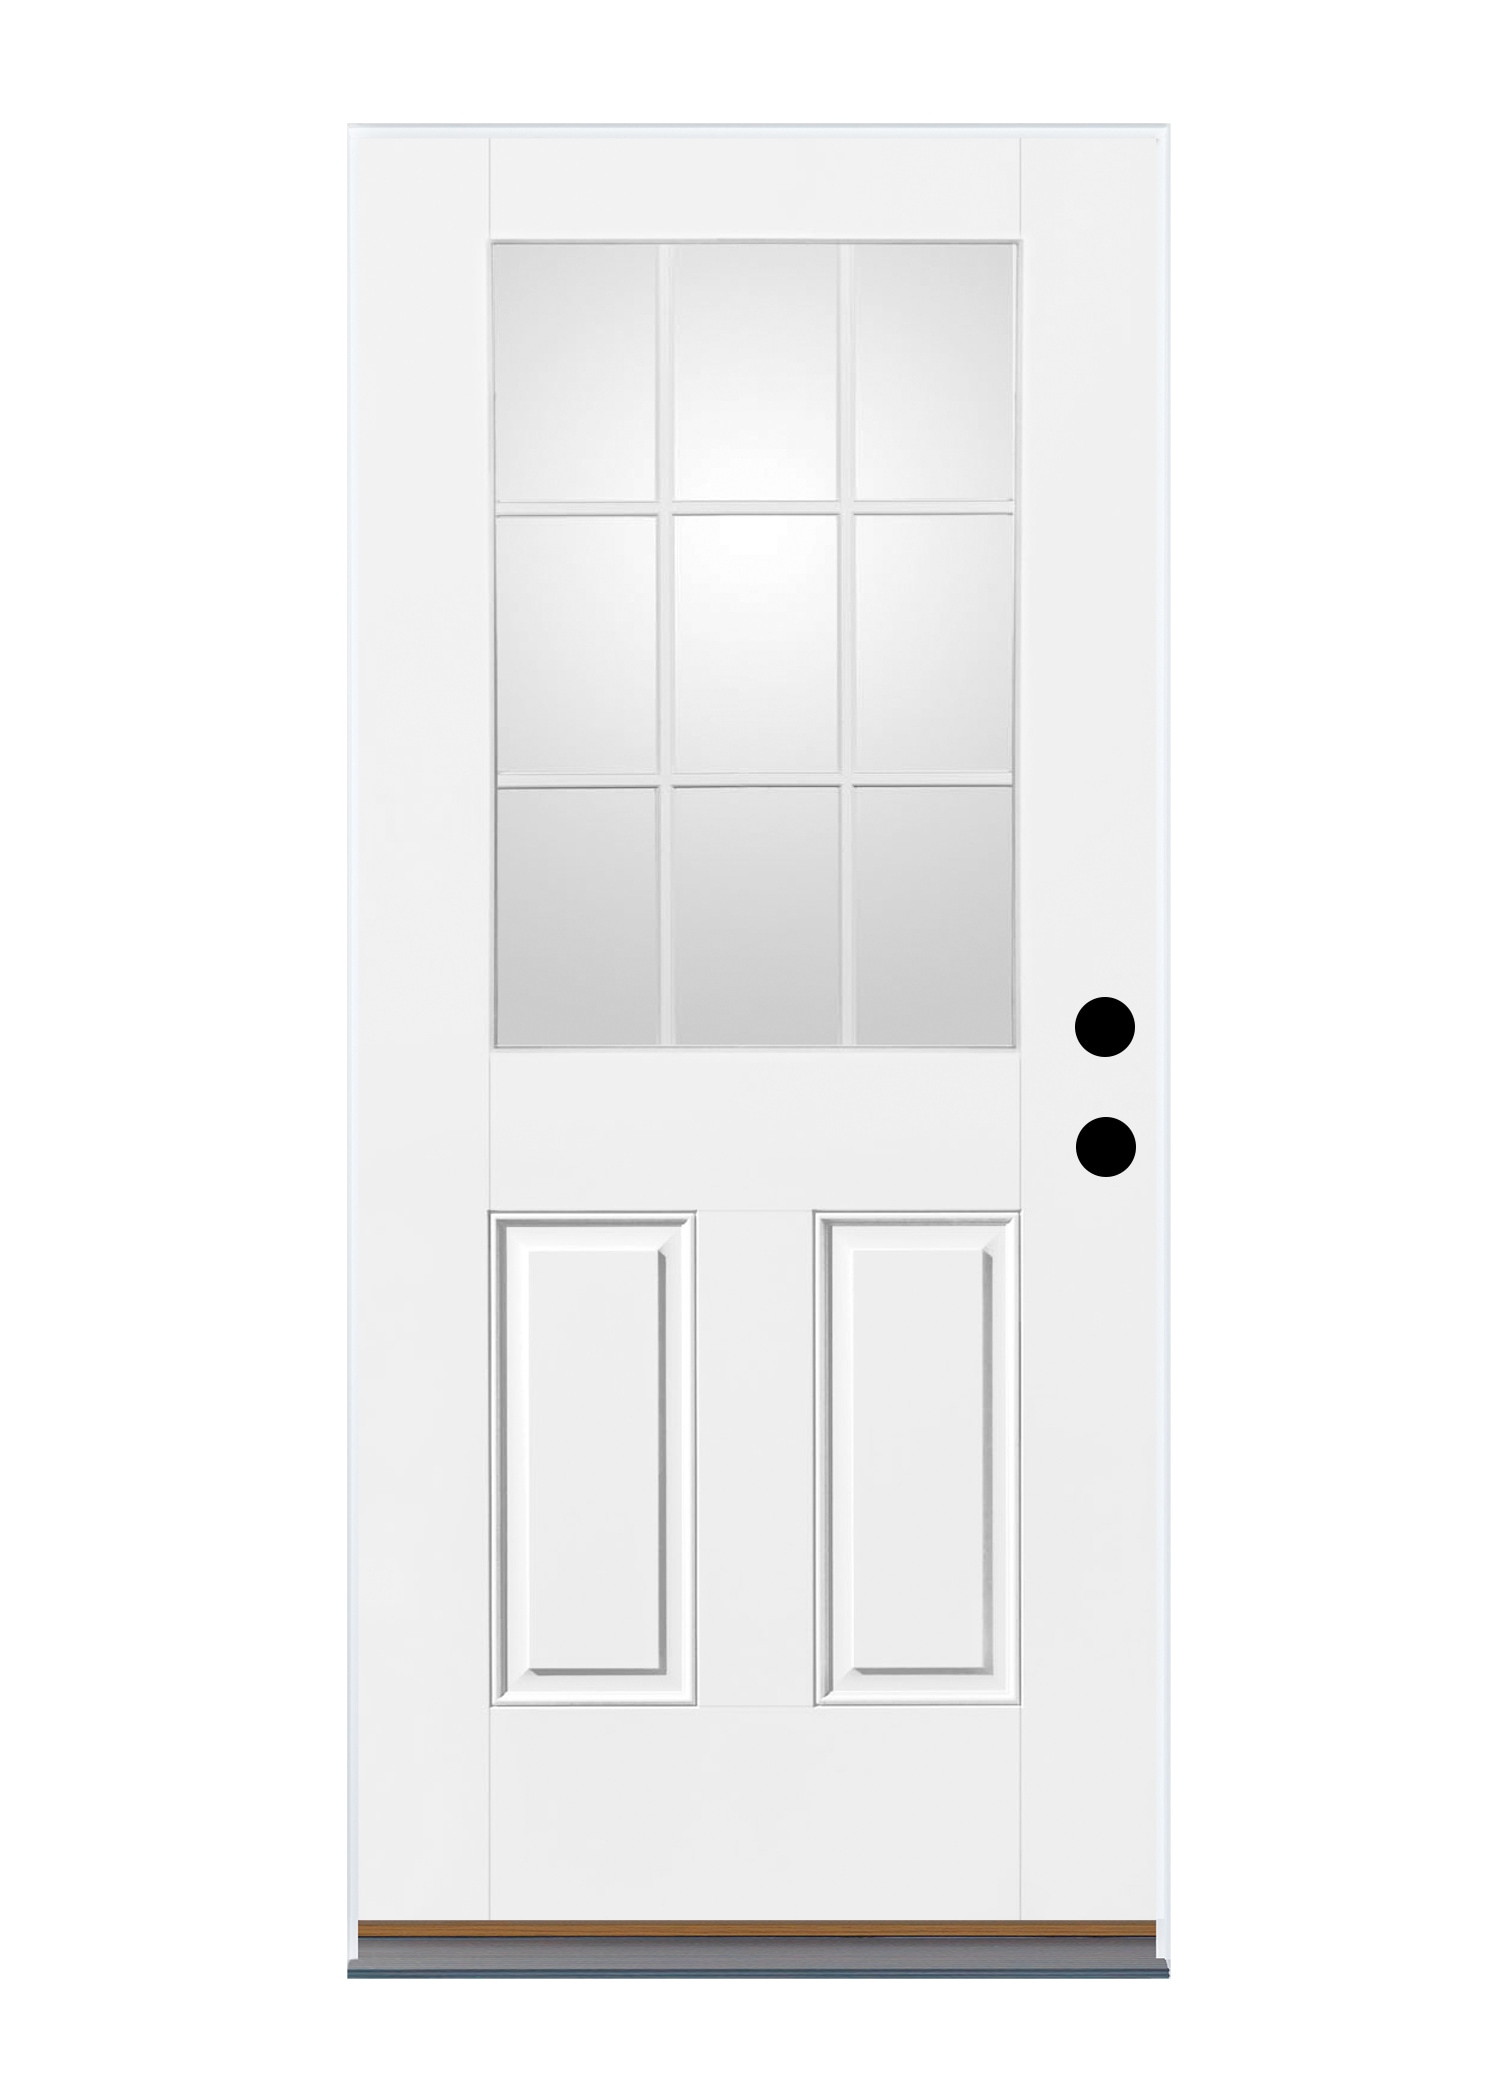 Therma-Tru Benchmark Doors 36-in x 80-in Fiberglass Half Lite Right-Hand Outswing Ready To Paint Prehung Single Front Door Insulating Core in White -  SSCD4E30RNOS